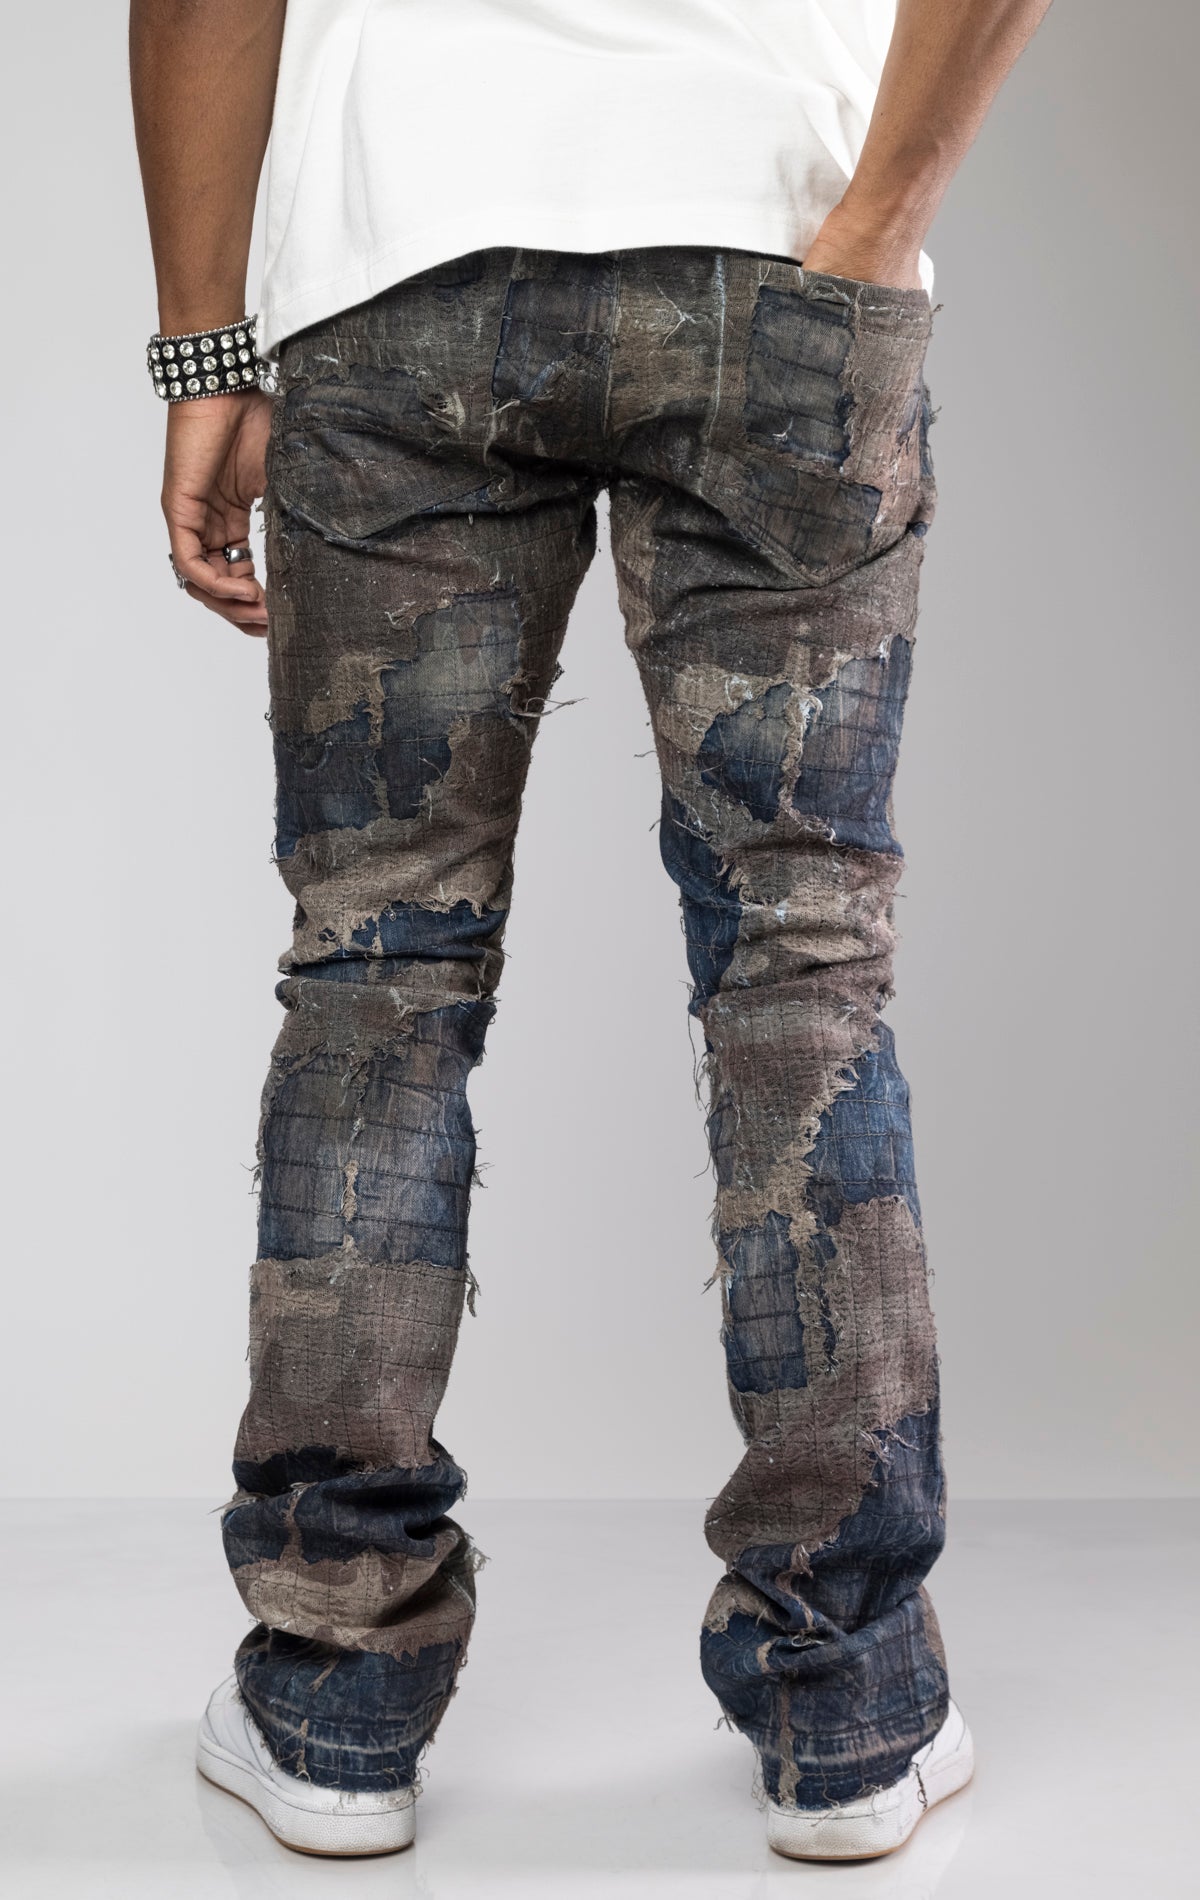 Distressed skinny flare jeans with stacked ankles. Jeans feature all-over gauze patches, intricate stitching, and a ripped and repaired aesthetic. share more_vert